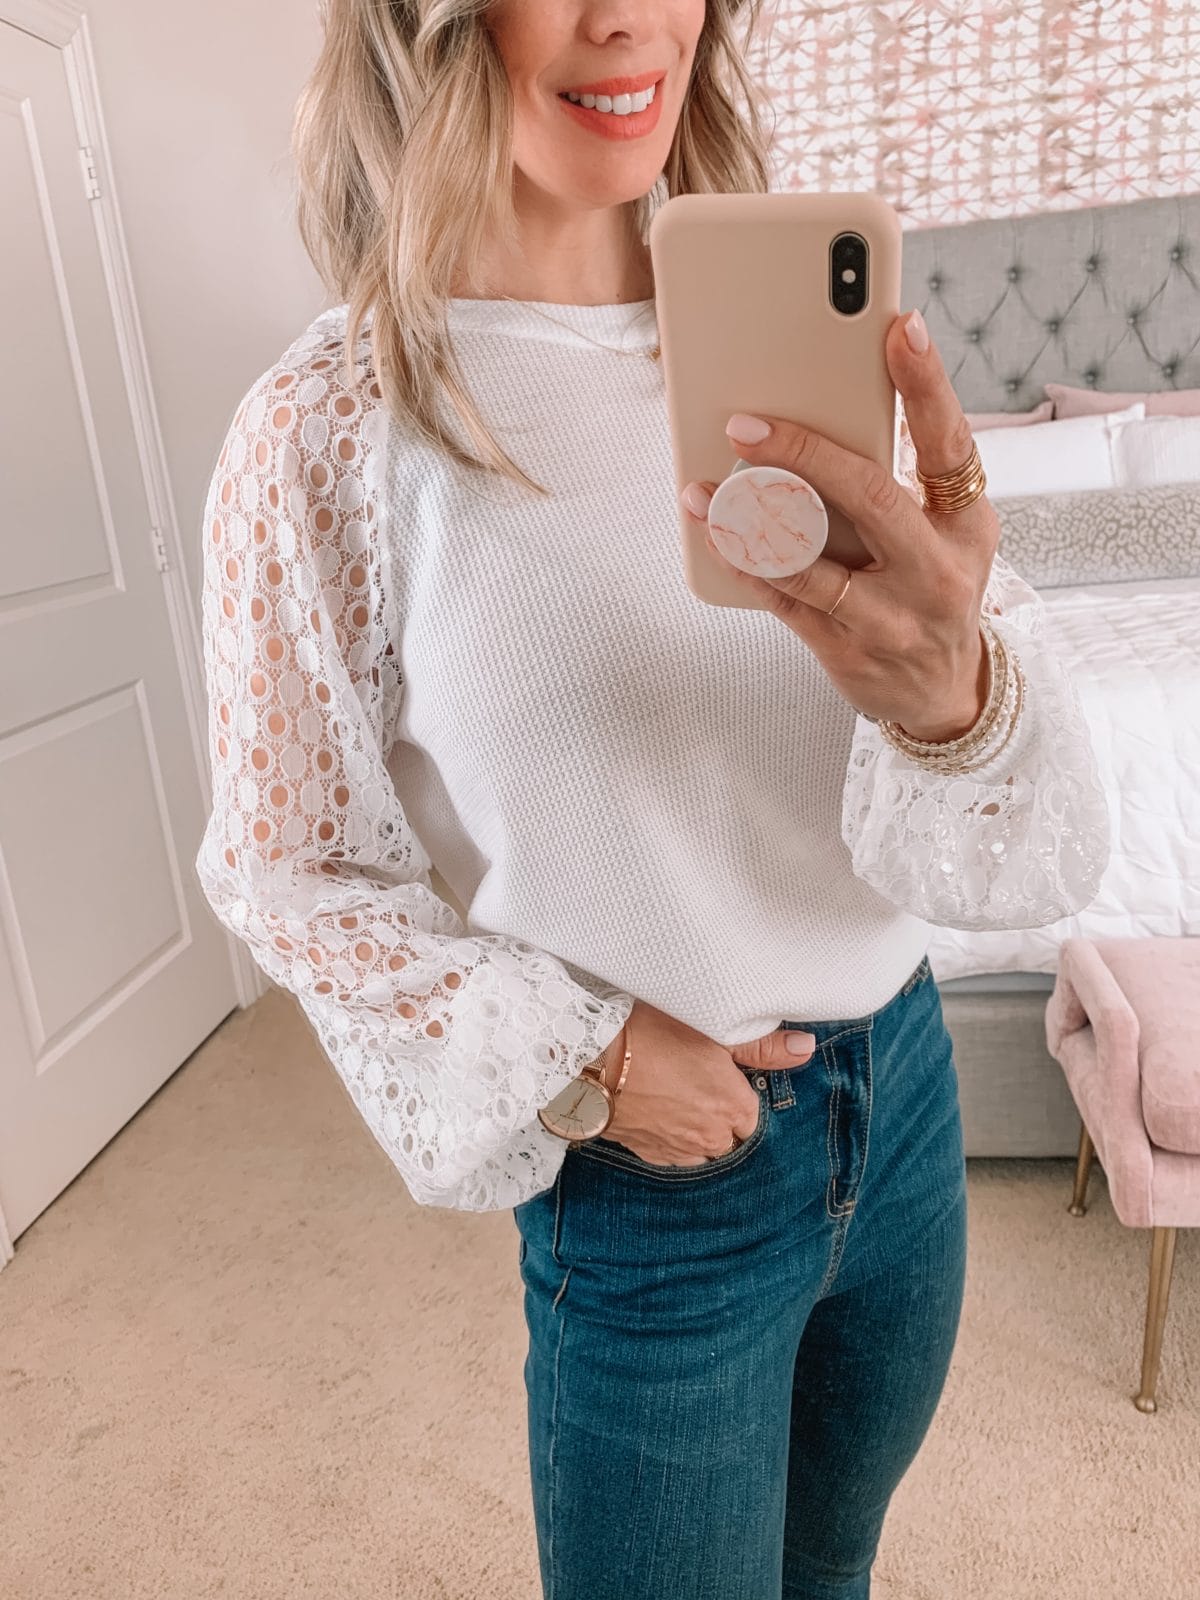 Amazon Fashion Faves, White Lace Sleeved Top, Jeans, Heels 